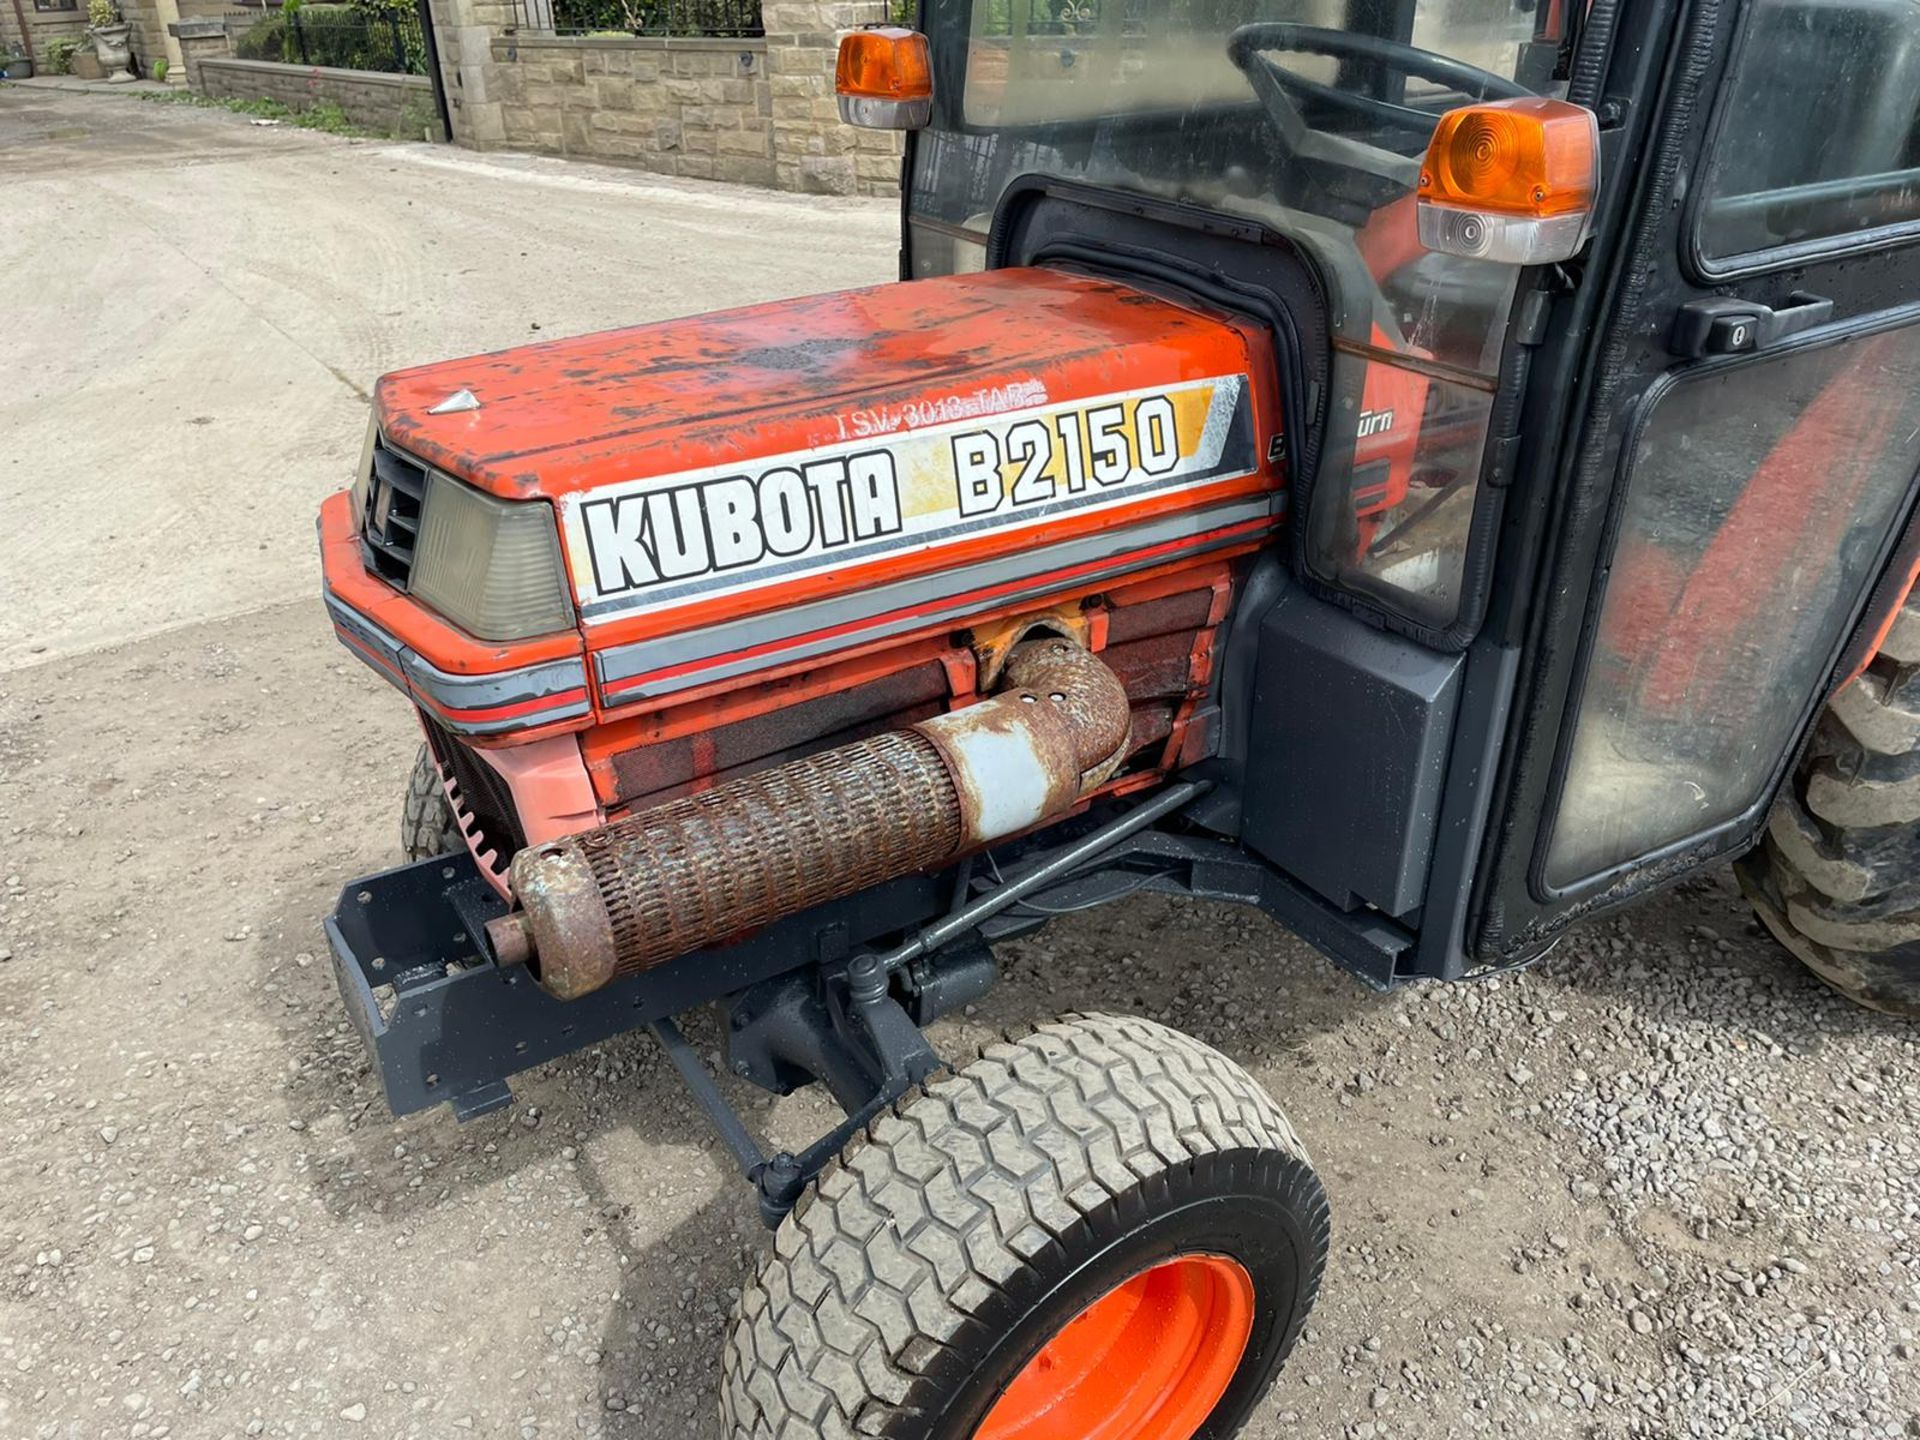 KUBOTA B2150 COMPACT TRACTOR, RUNS AND DRIVES, SHOWING 2361 HOURS, 23hp, ROAD KIT *PLUS VAT* - Image 8 of 8